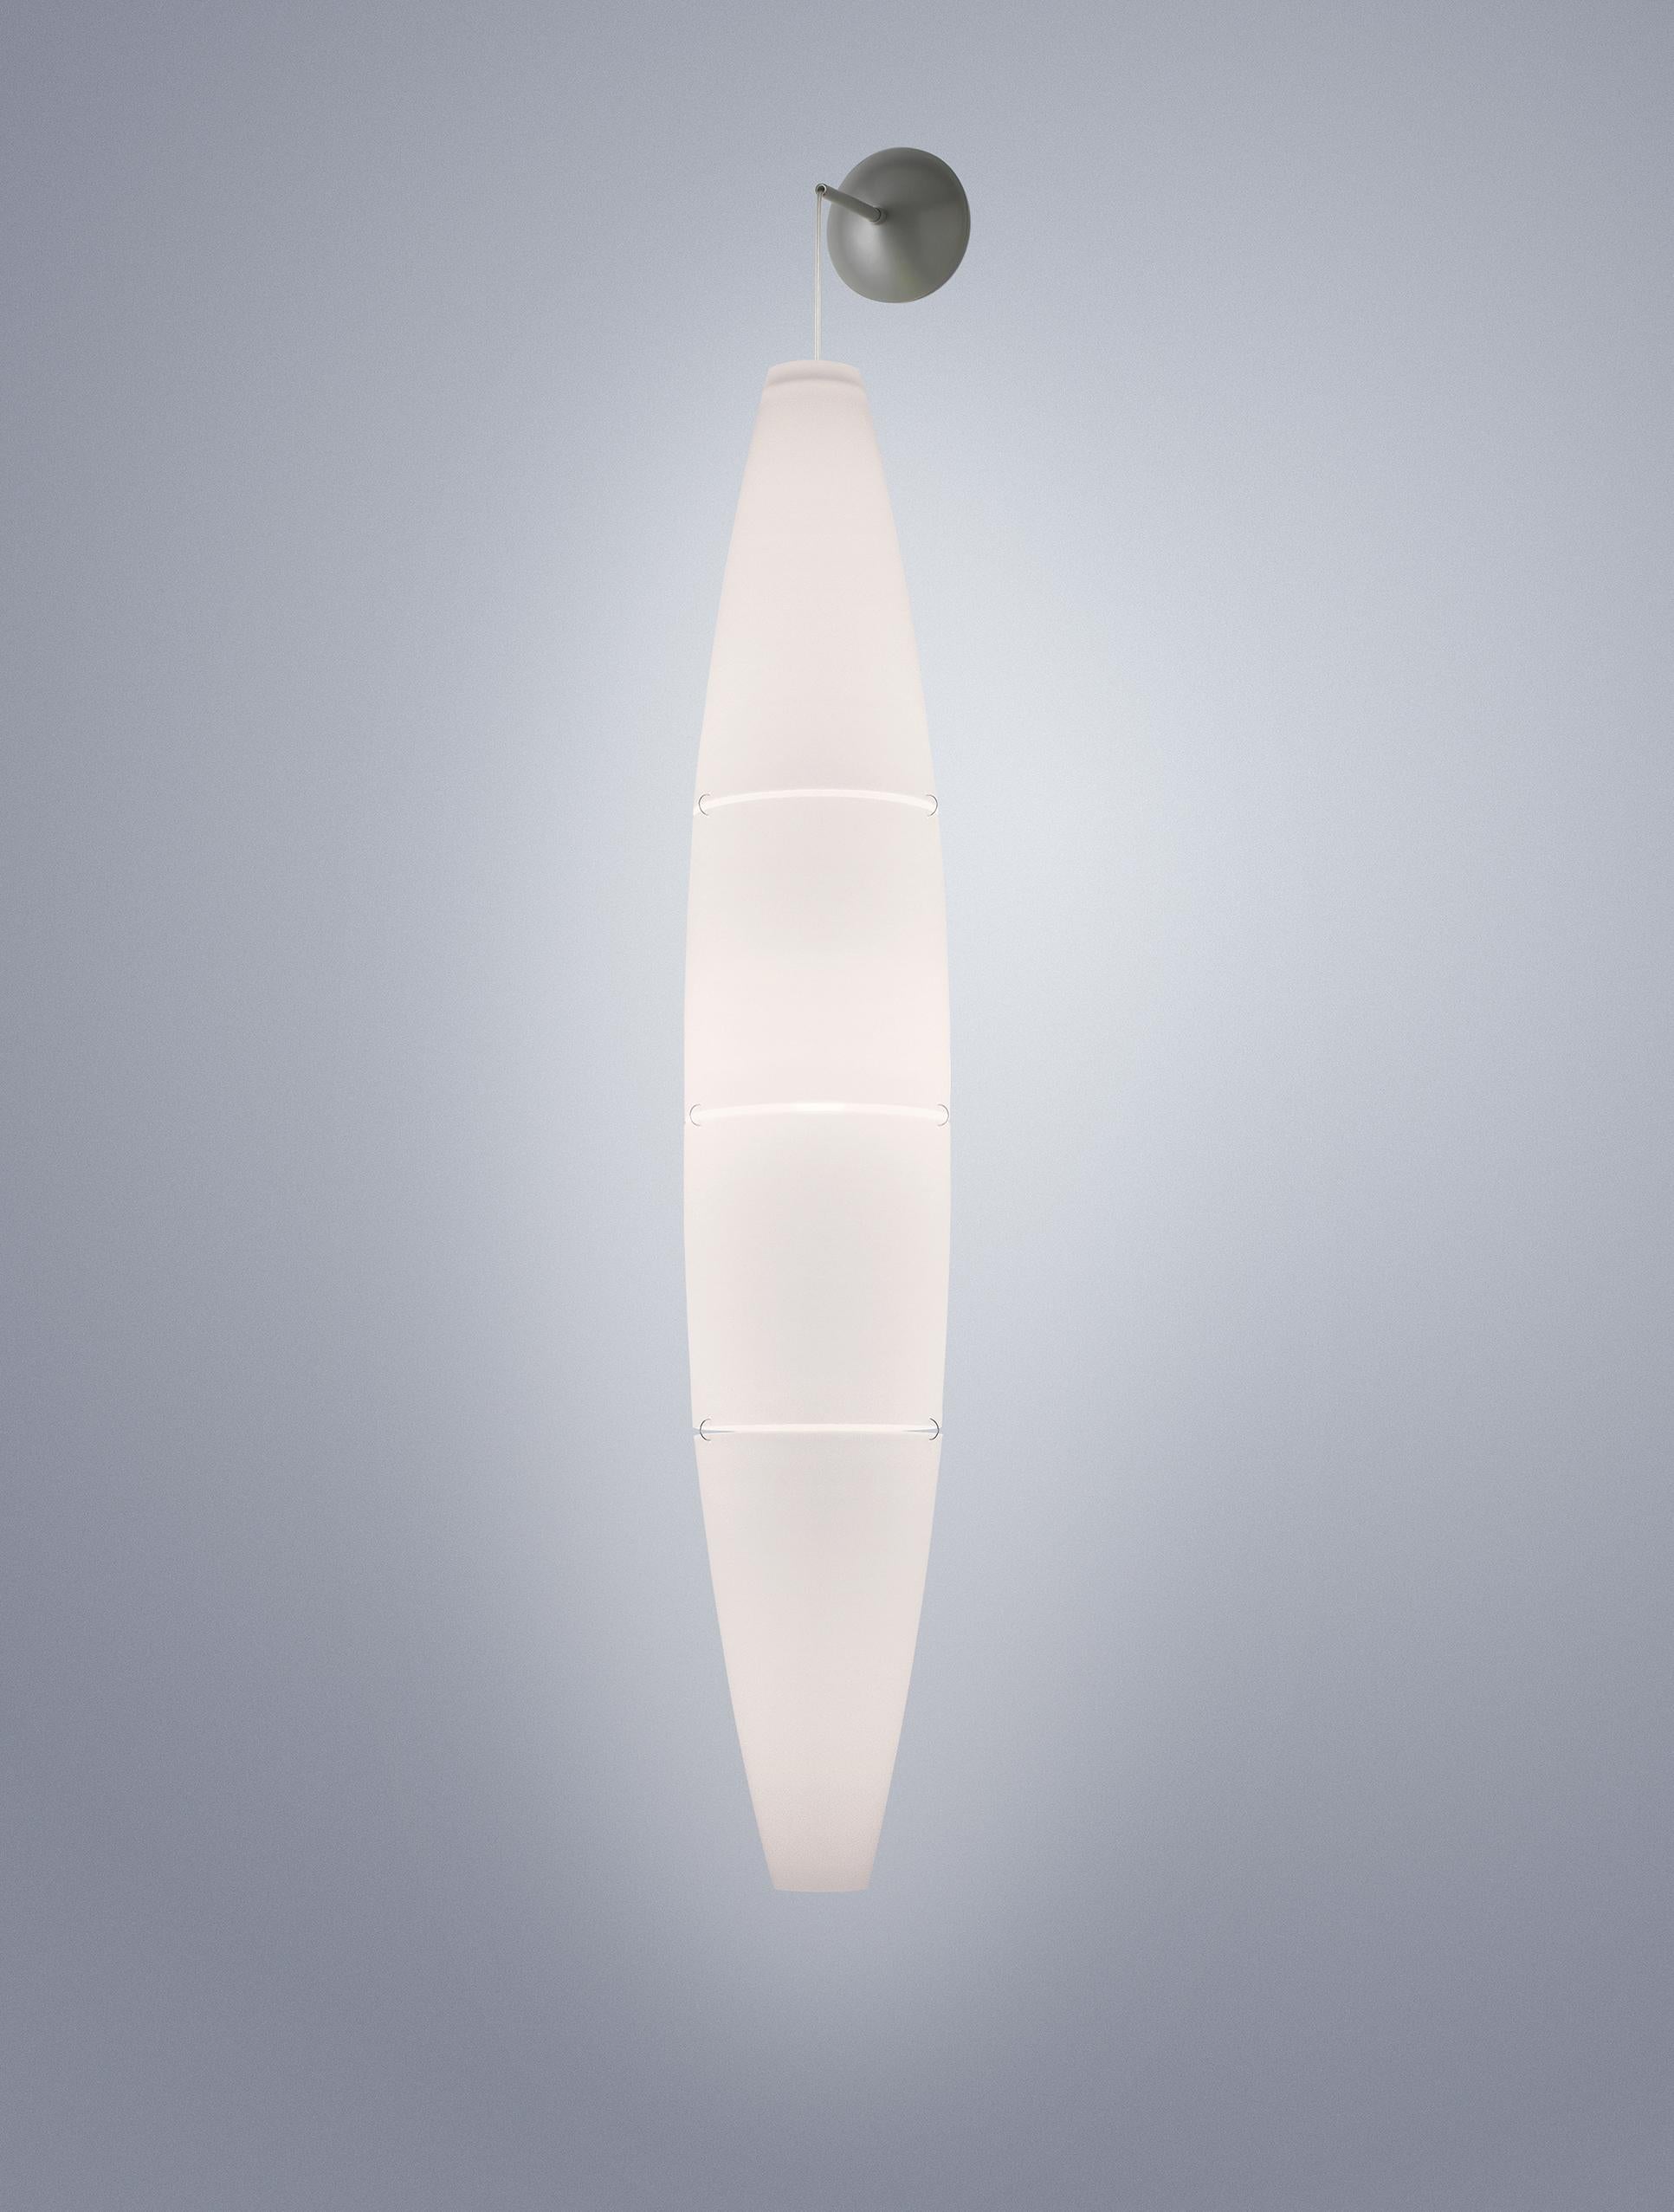 Suspension lamp with diffused light. Diffuser consisting of four injection molded polyethylene parts. aluminum painted metal diffuser support and wall rose, transparent electrical cable.

Materials:
Injection molded polyethylene and varnished